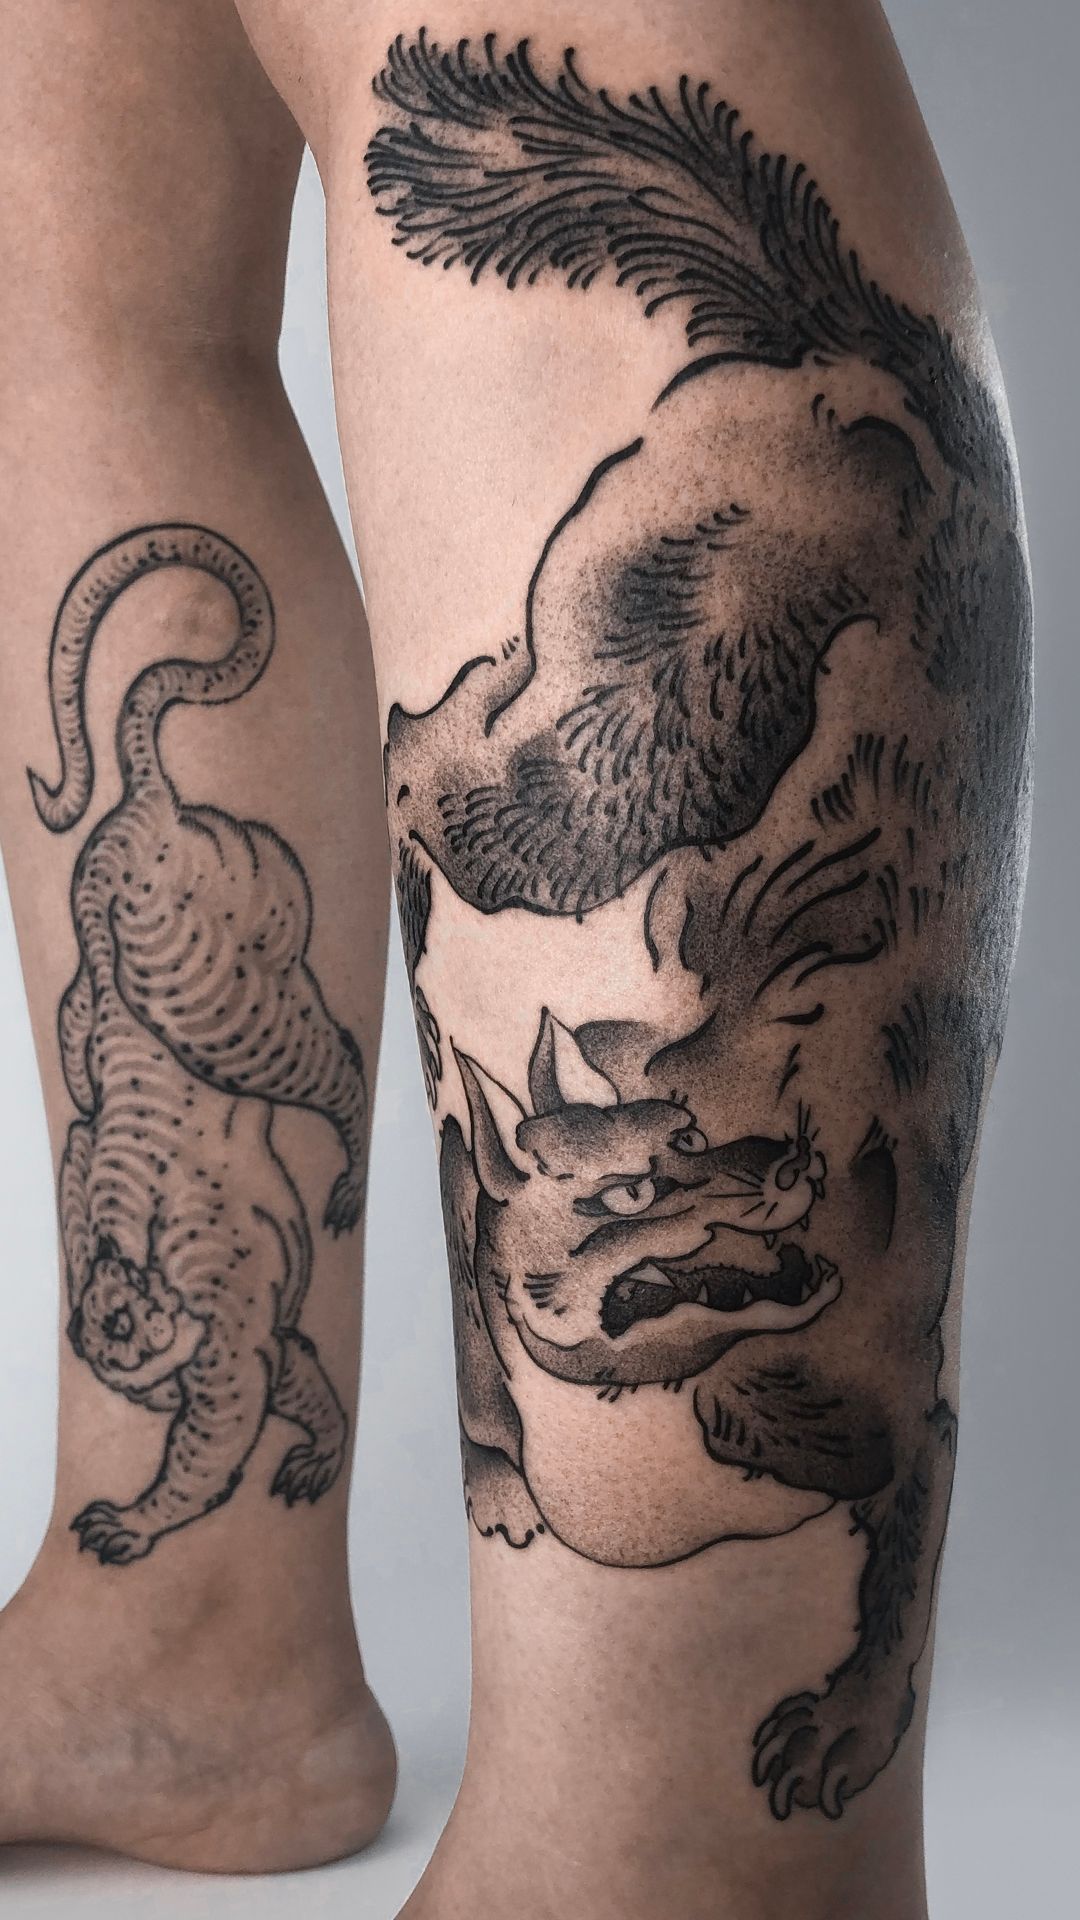 American traditional take on a displacer beast from DD by Dennis Cooper  at Acworth Tattoo Company in Acworth GA USA  rtattoos